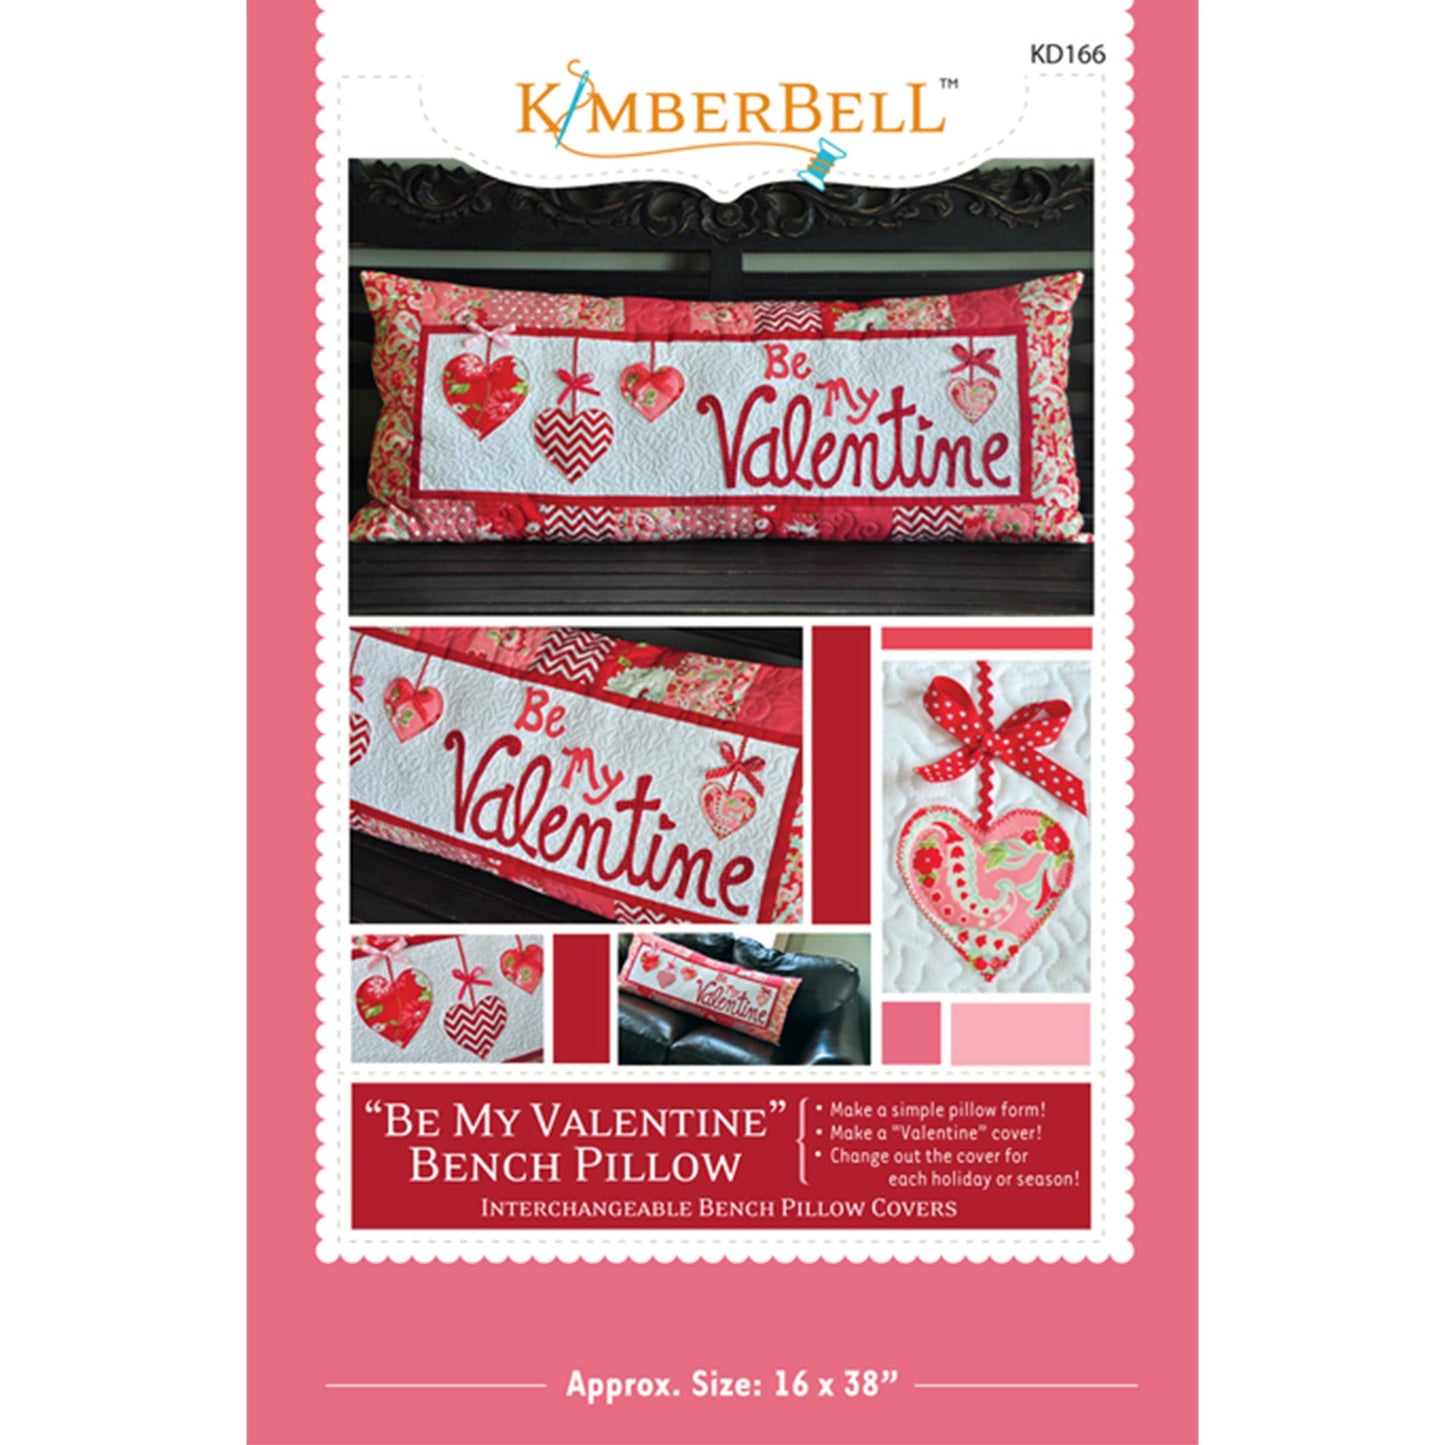 Dangling hearts, a sweet sentiment, and pieced border are somethings to love about the Be My Valentine Bench Pillow Sewing Version (KD166) by Kimberbell. It is the perfect way to bring in the season and announce your love to someone special. Photo shows the pattern front cover.